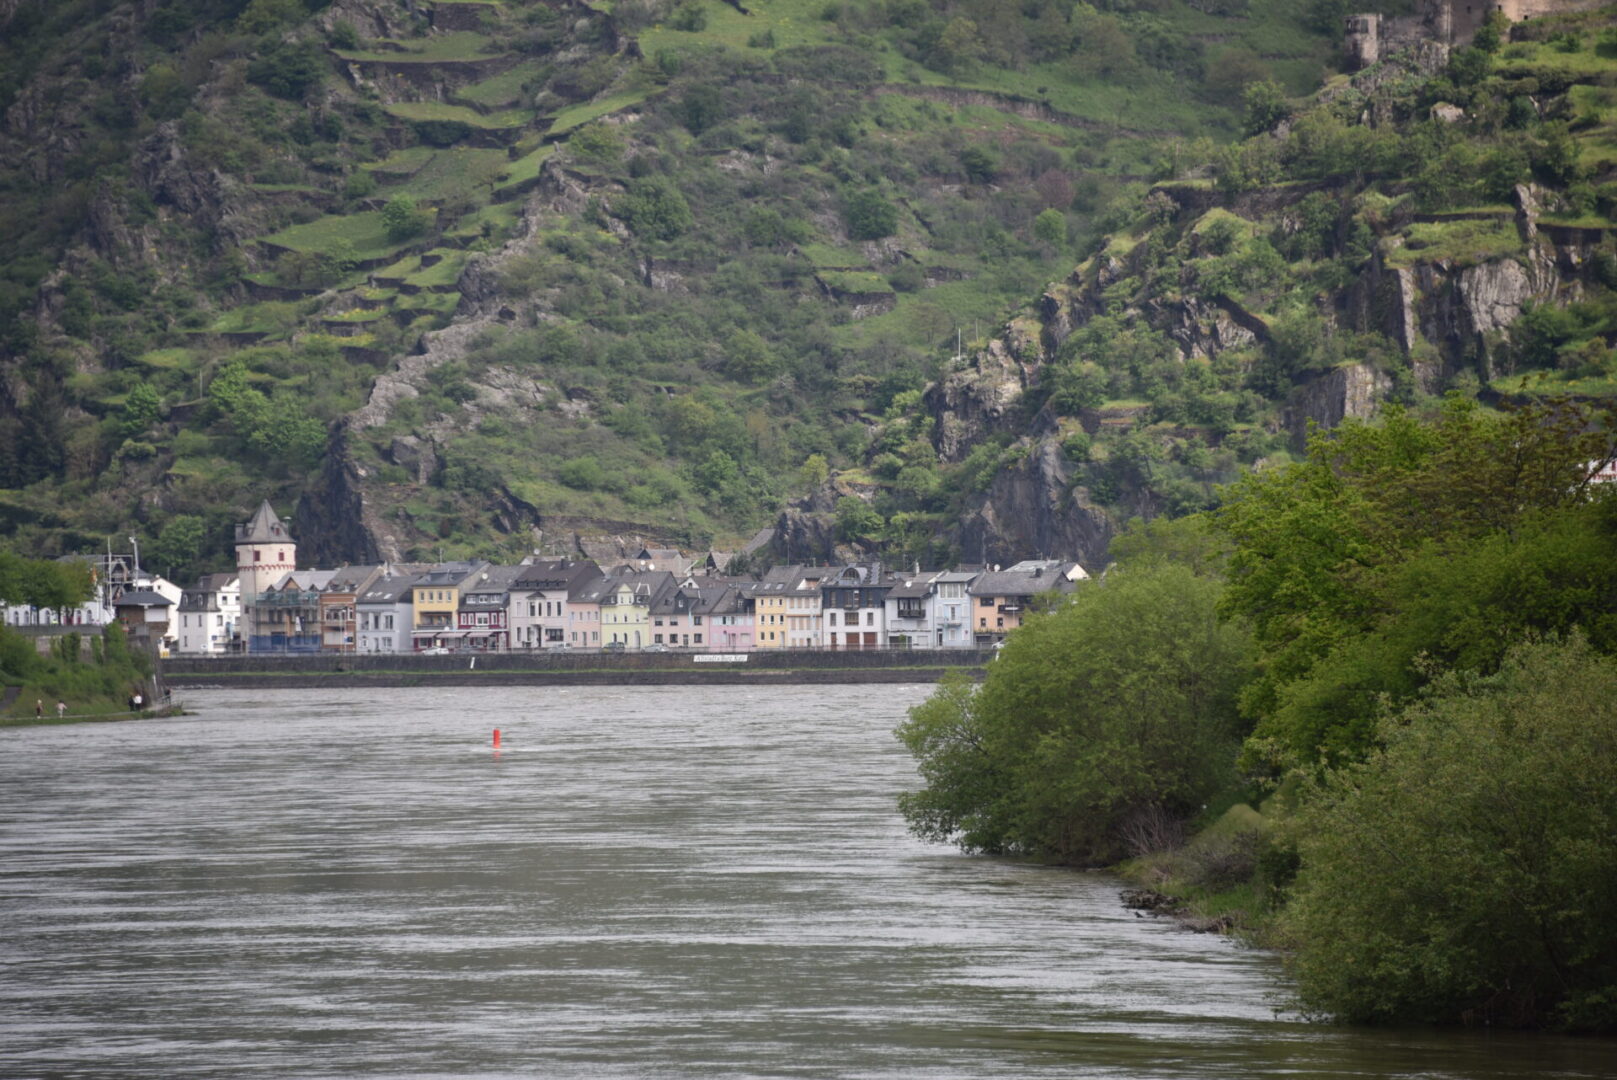 A river with houses on it and mountains in the background.